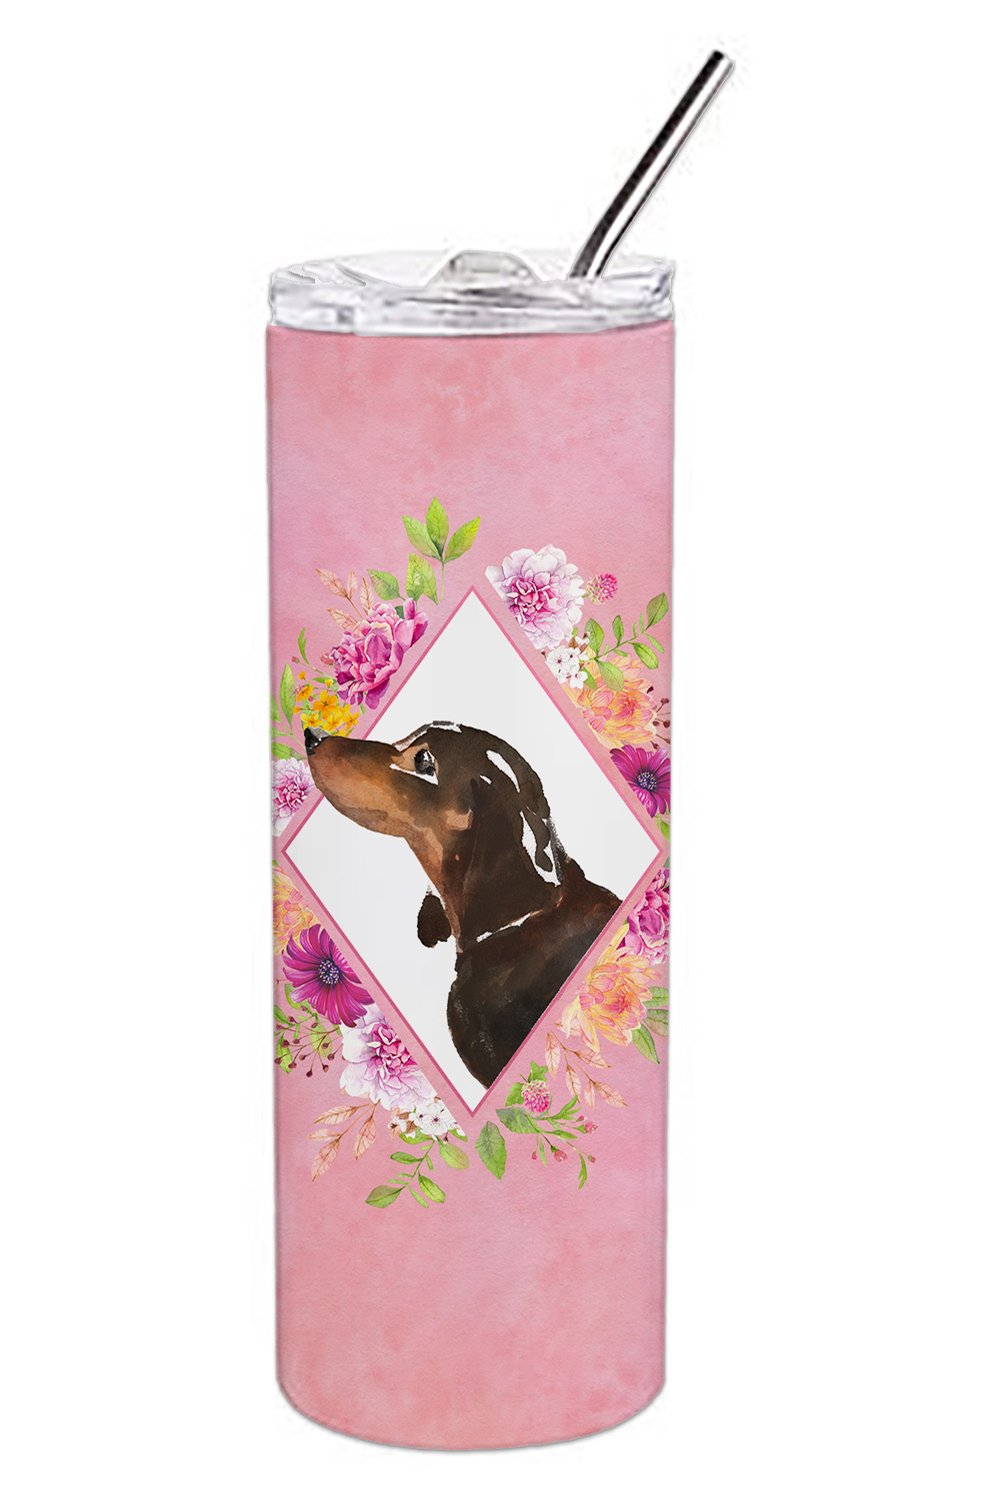 Black and Tan Dachshund Pink Flowers Double Walled Stainless Steel 20 oz Skinny Tumbler CK4262TBL20 by Caroline's Treasures